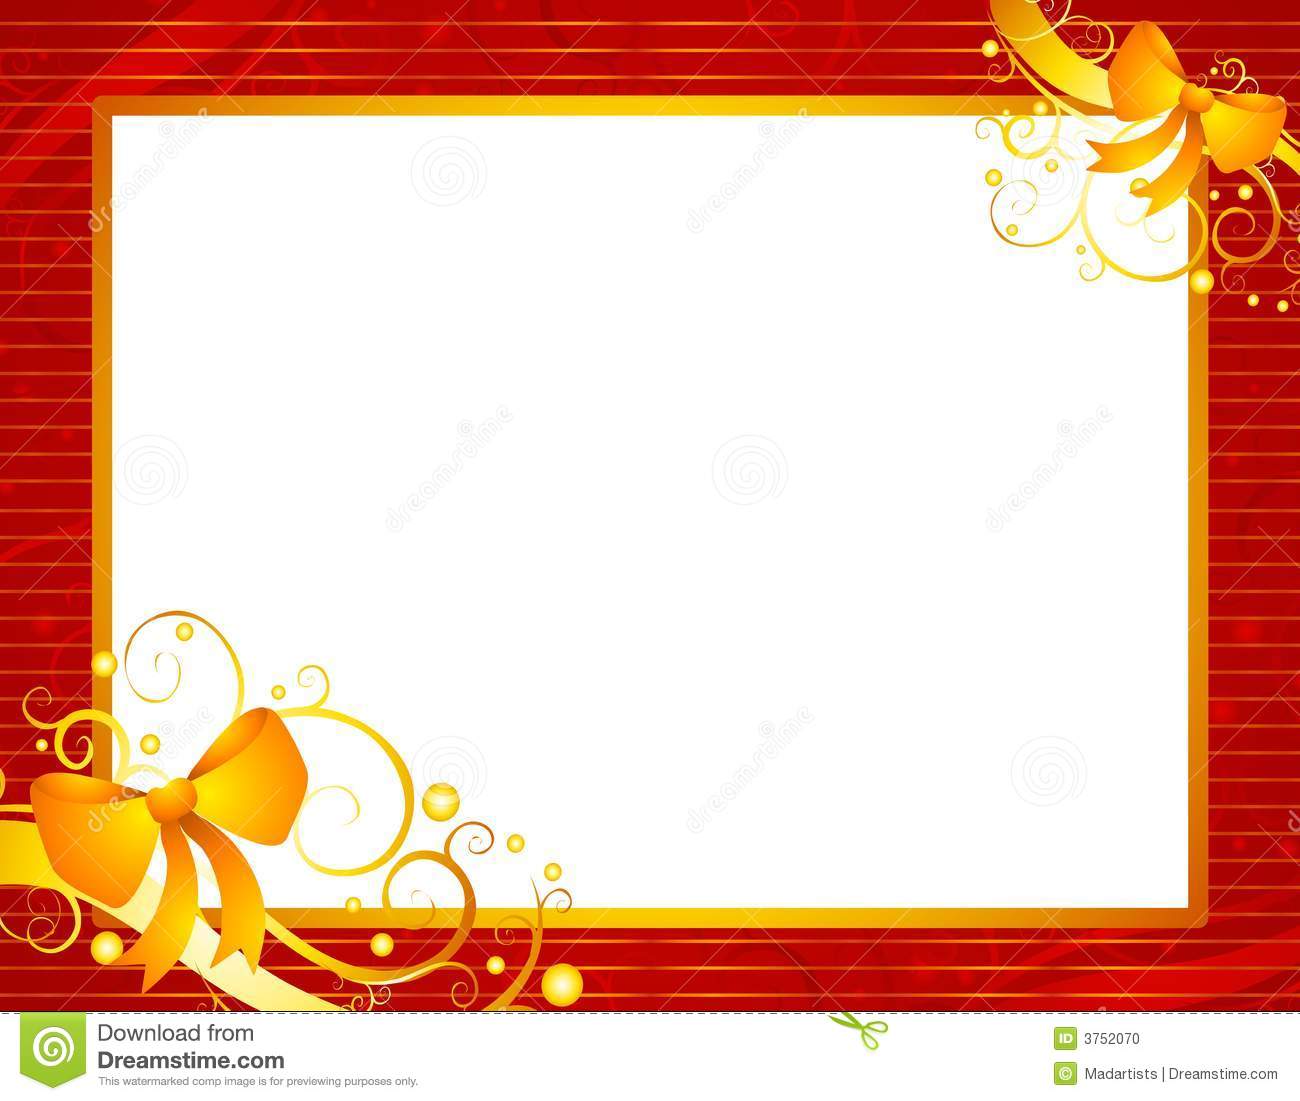 Clip Art Illustration Featuring A Red Striped Frame With Gold